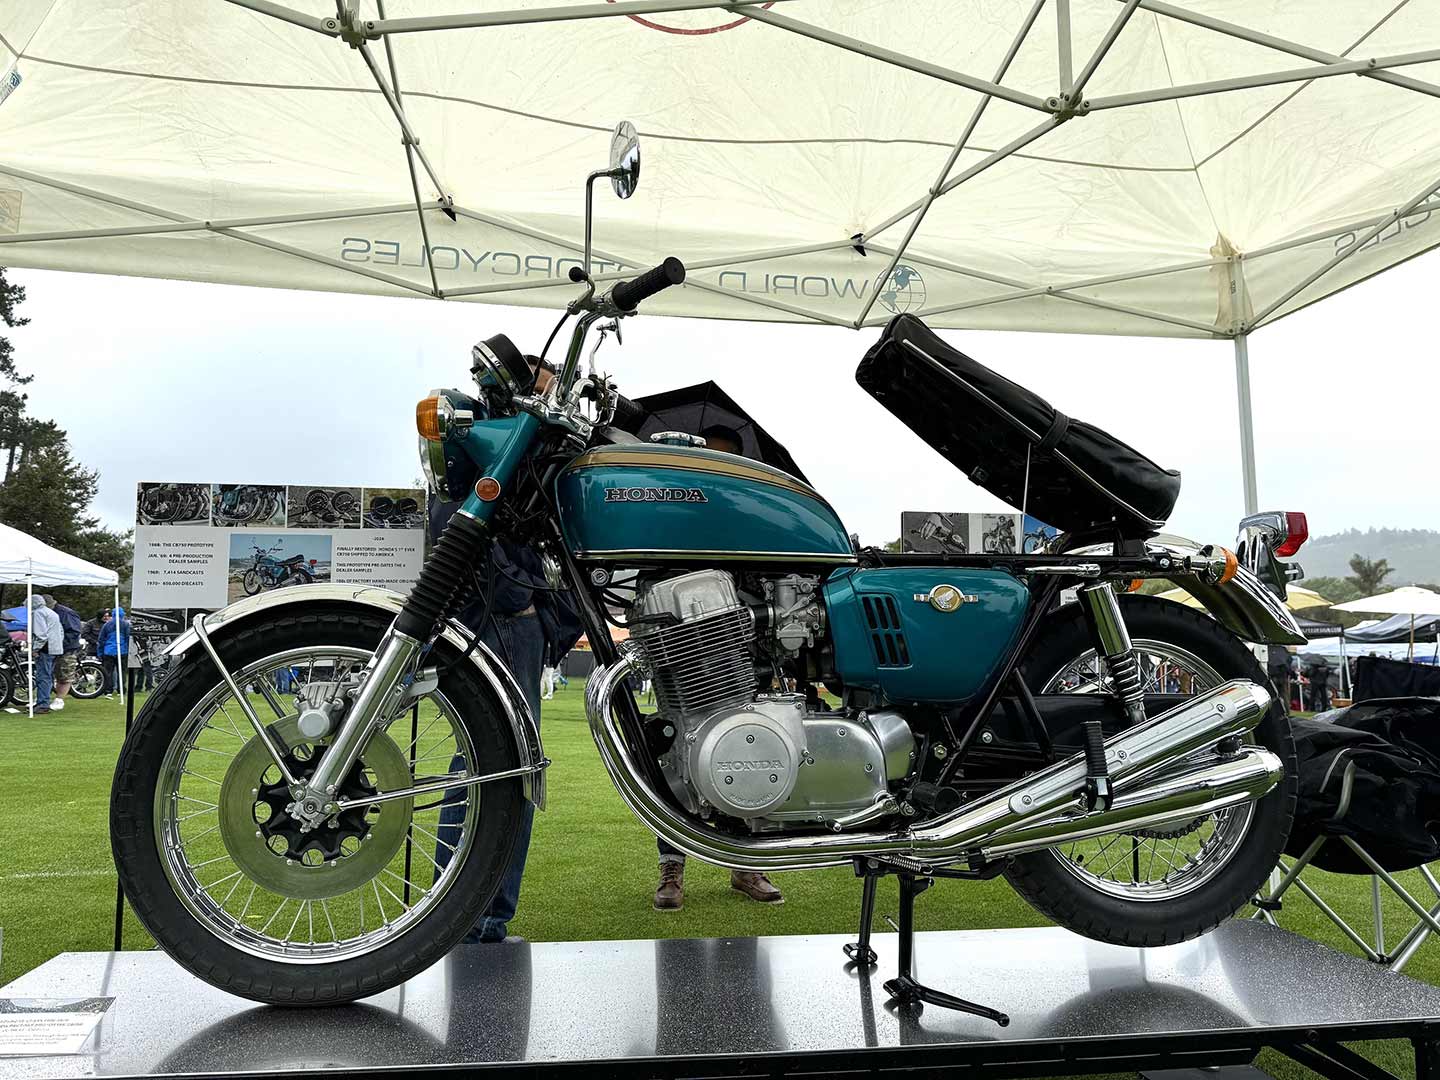 OK, so not a cruiser, but talk about rare. This one-of-one 1968 Honda CB750 brought by Vic World was awarded Best of Show.